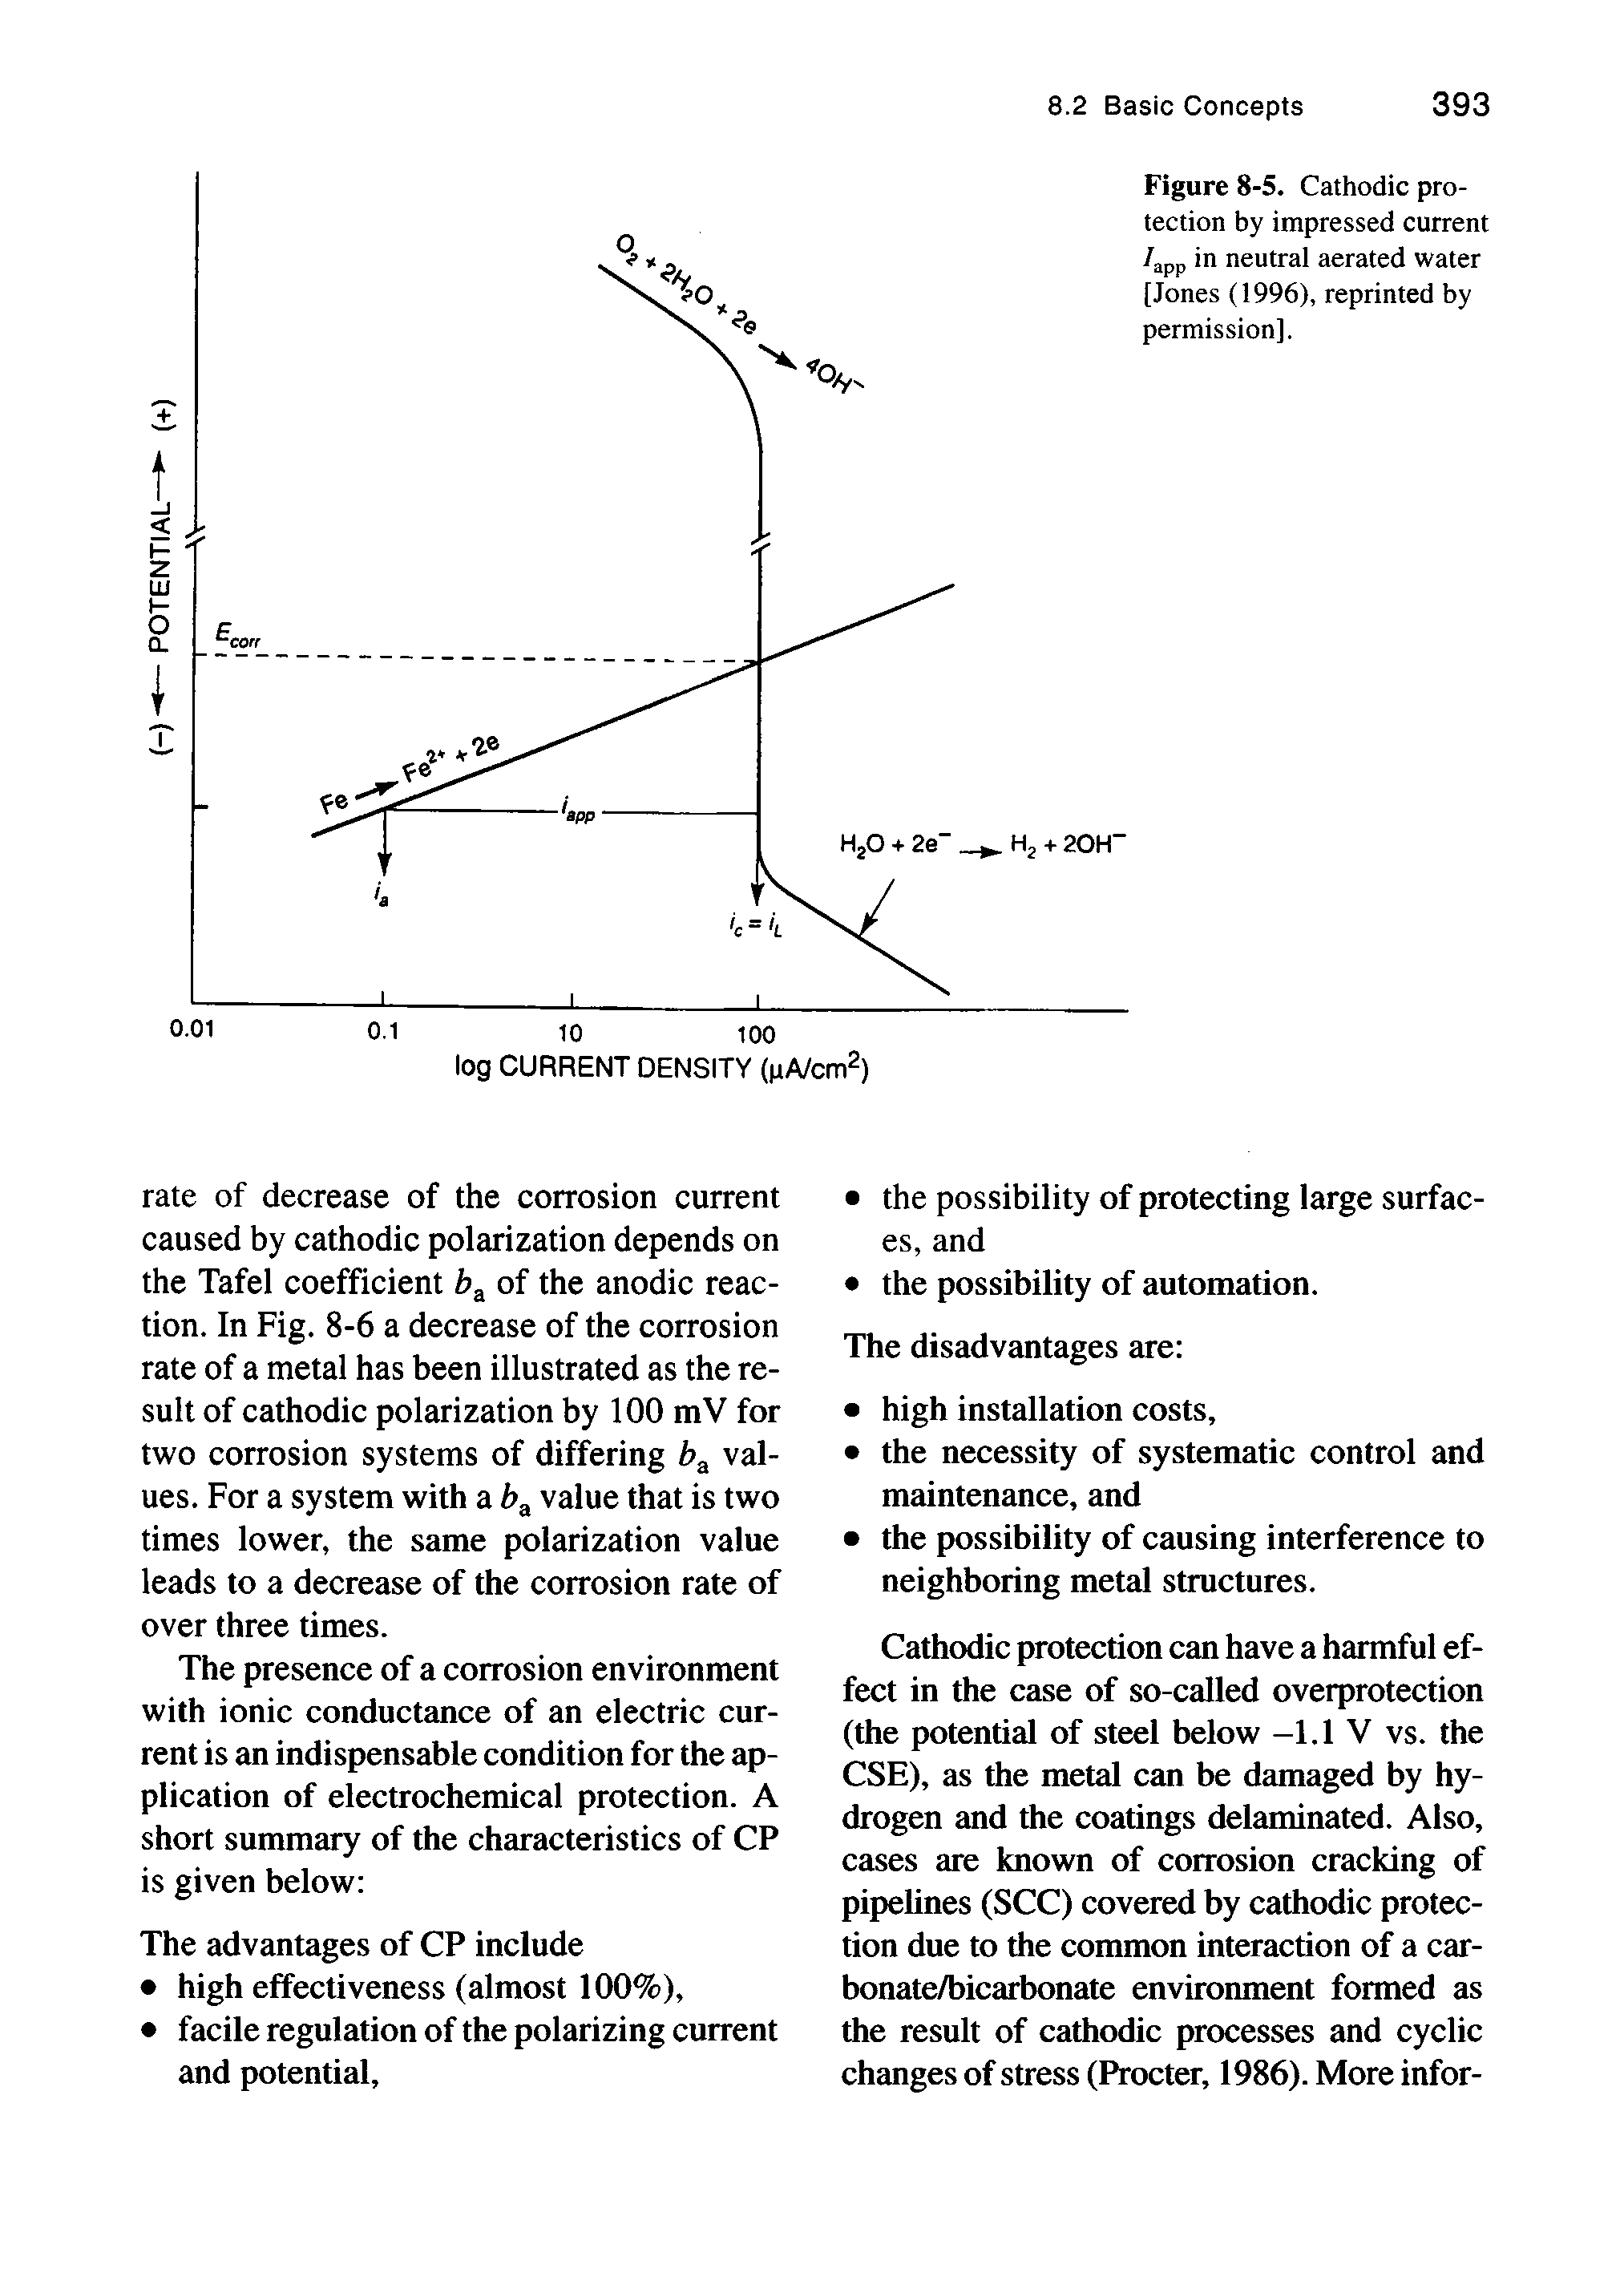 Figure 8-5. Cathodic protection by impressed current 4pp in neutral aerated water [Jones (1996), reprinted by permission].